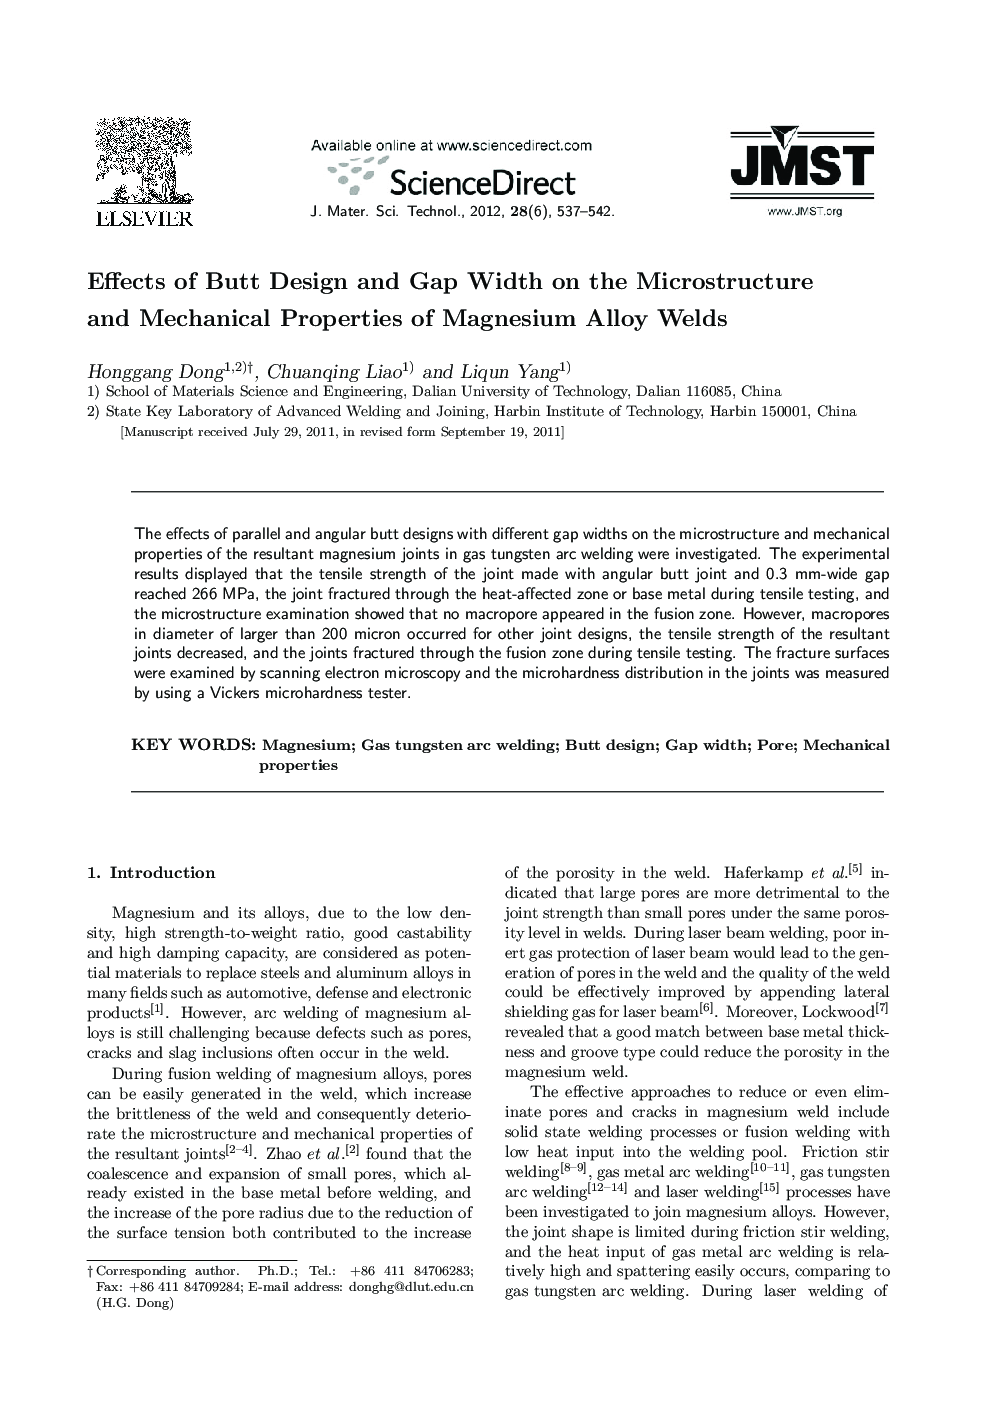 Effects of Butt Design and Gap Width on the Microstructure and Mechanical Properties of Magnesium Alloy Welds